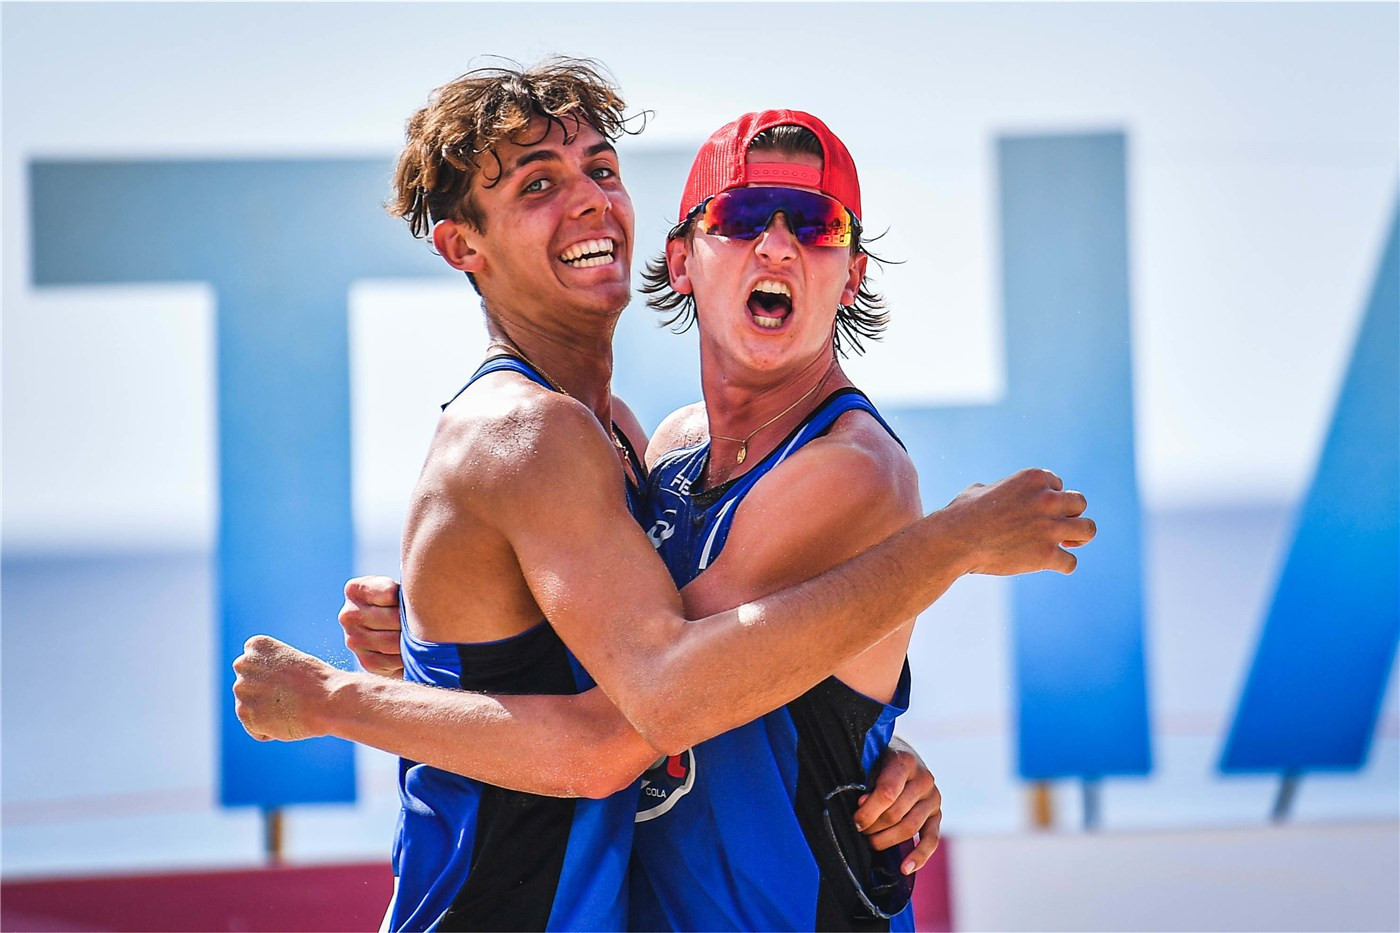 Teo Rotar and Arthur Canet took the men's crown without dropping a set in the entire tournament ©FIVB